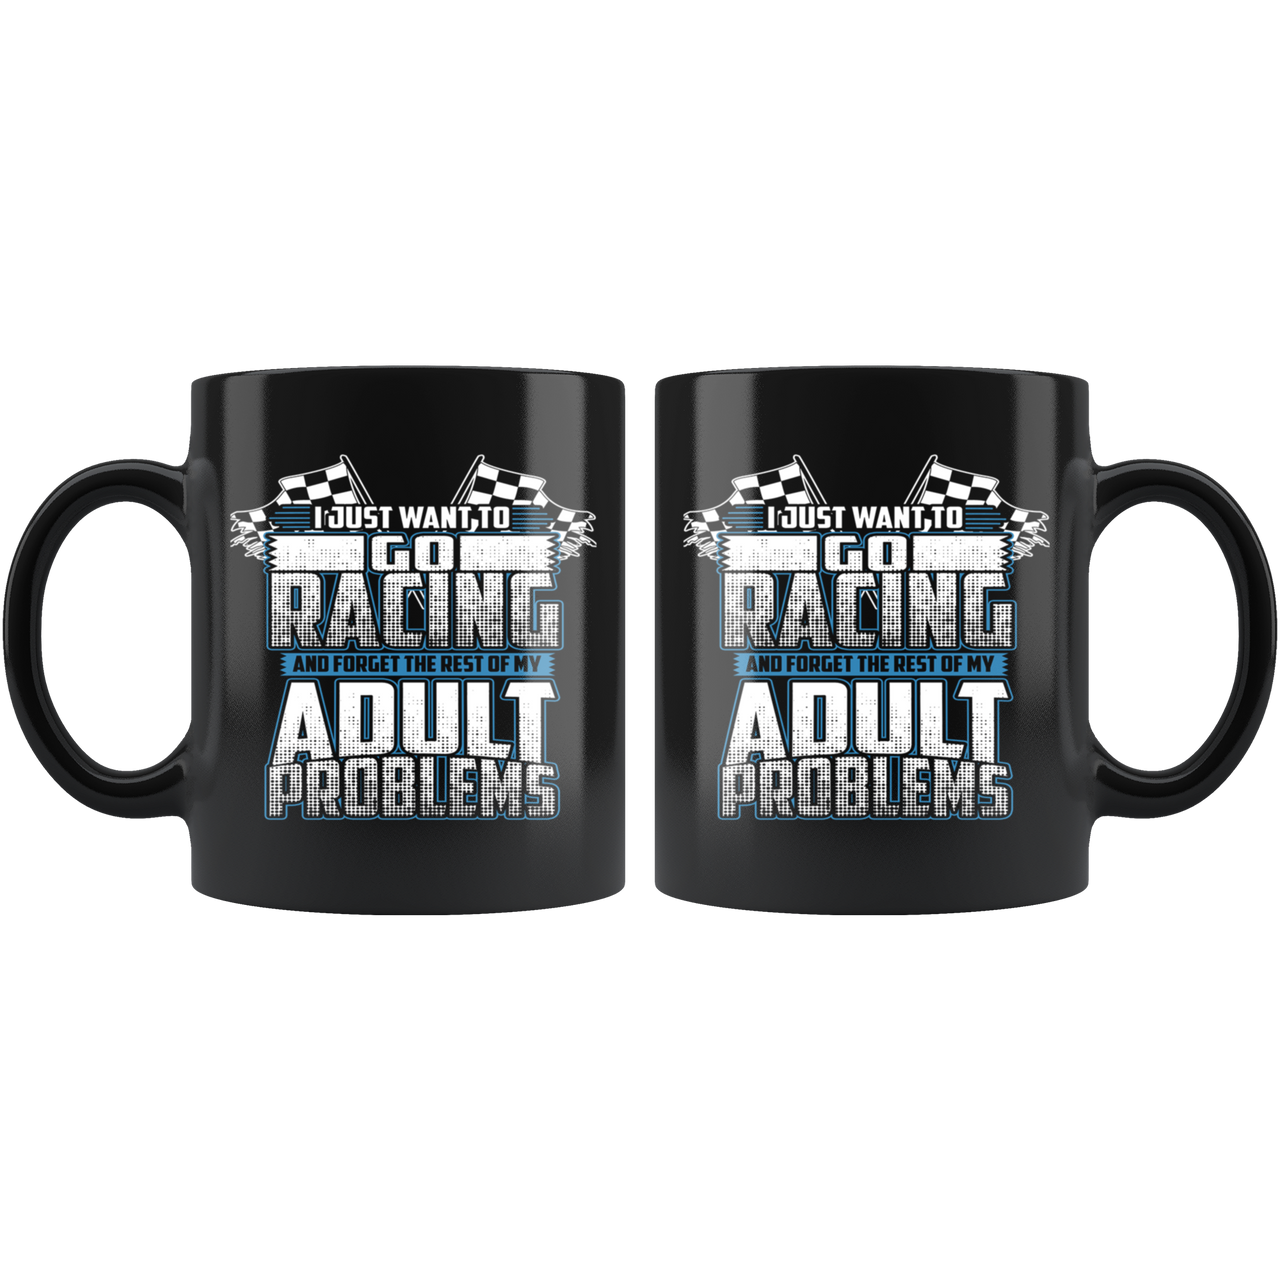 I Just Want To Go Racing And Forget The Rest Of My Adult Problems Mug!